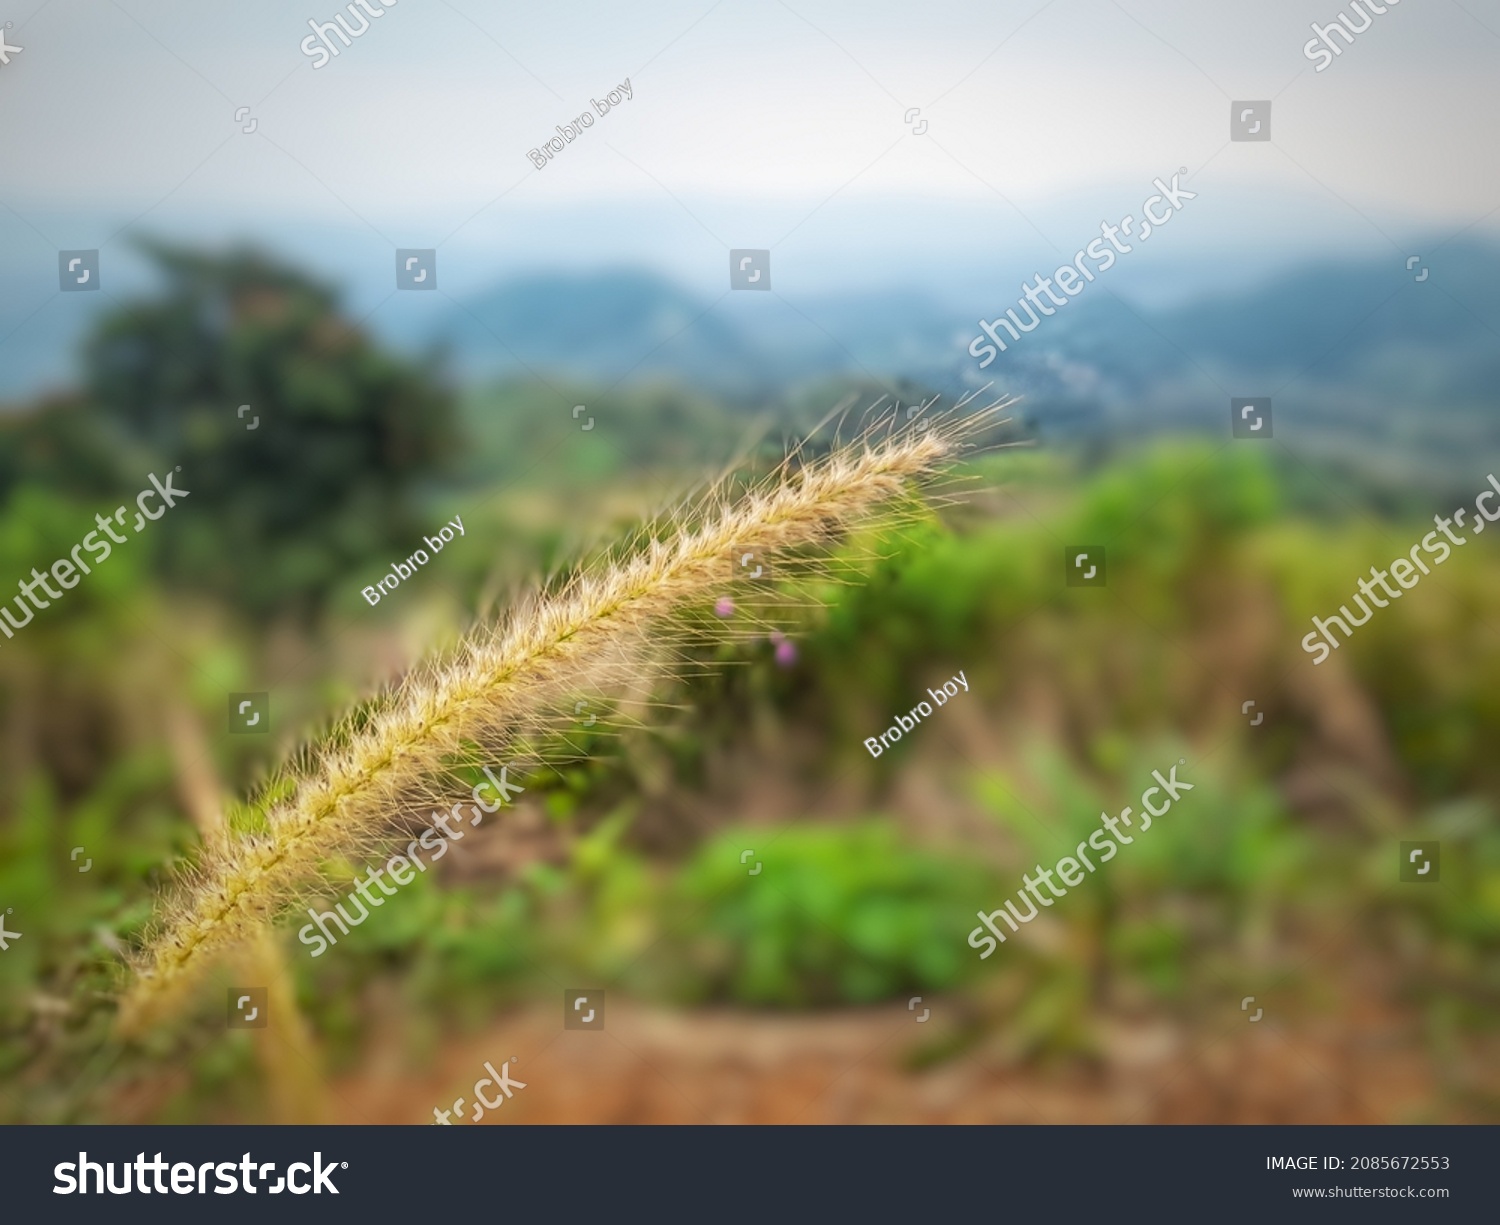 the abstract background is out of focus, only the grass is clearly visible #2085672553